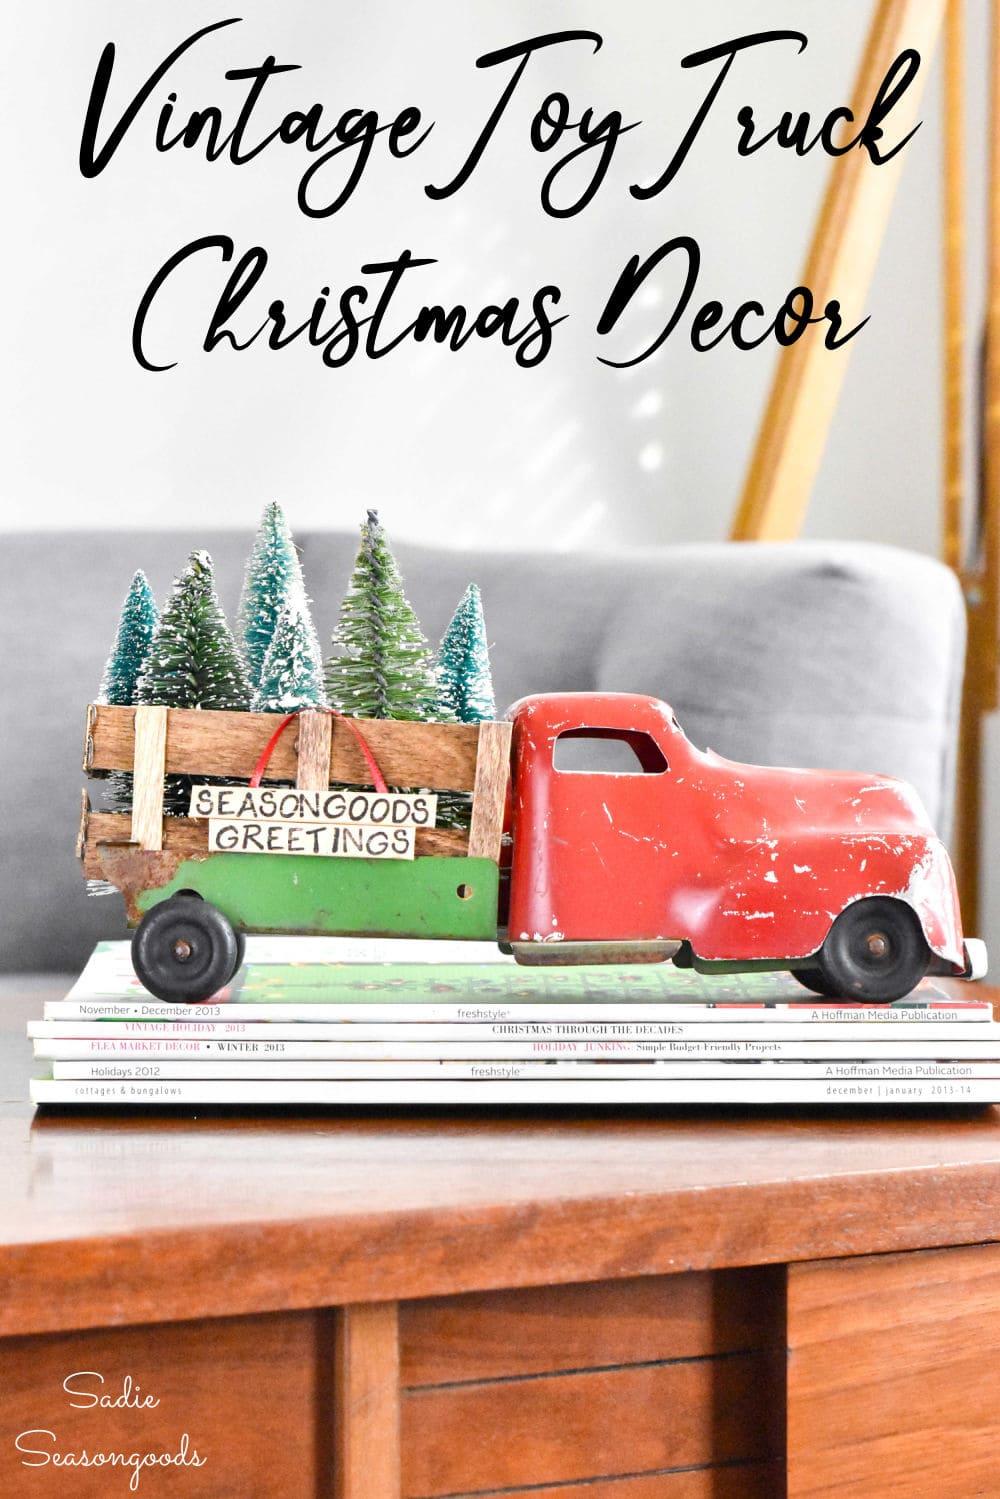 christmas truck decor from a vintage toy truck